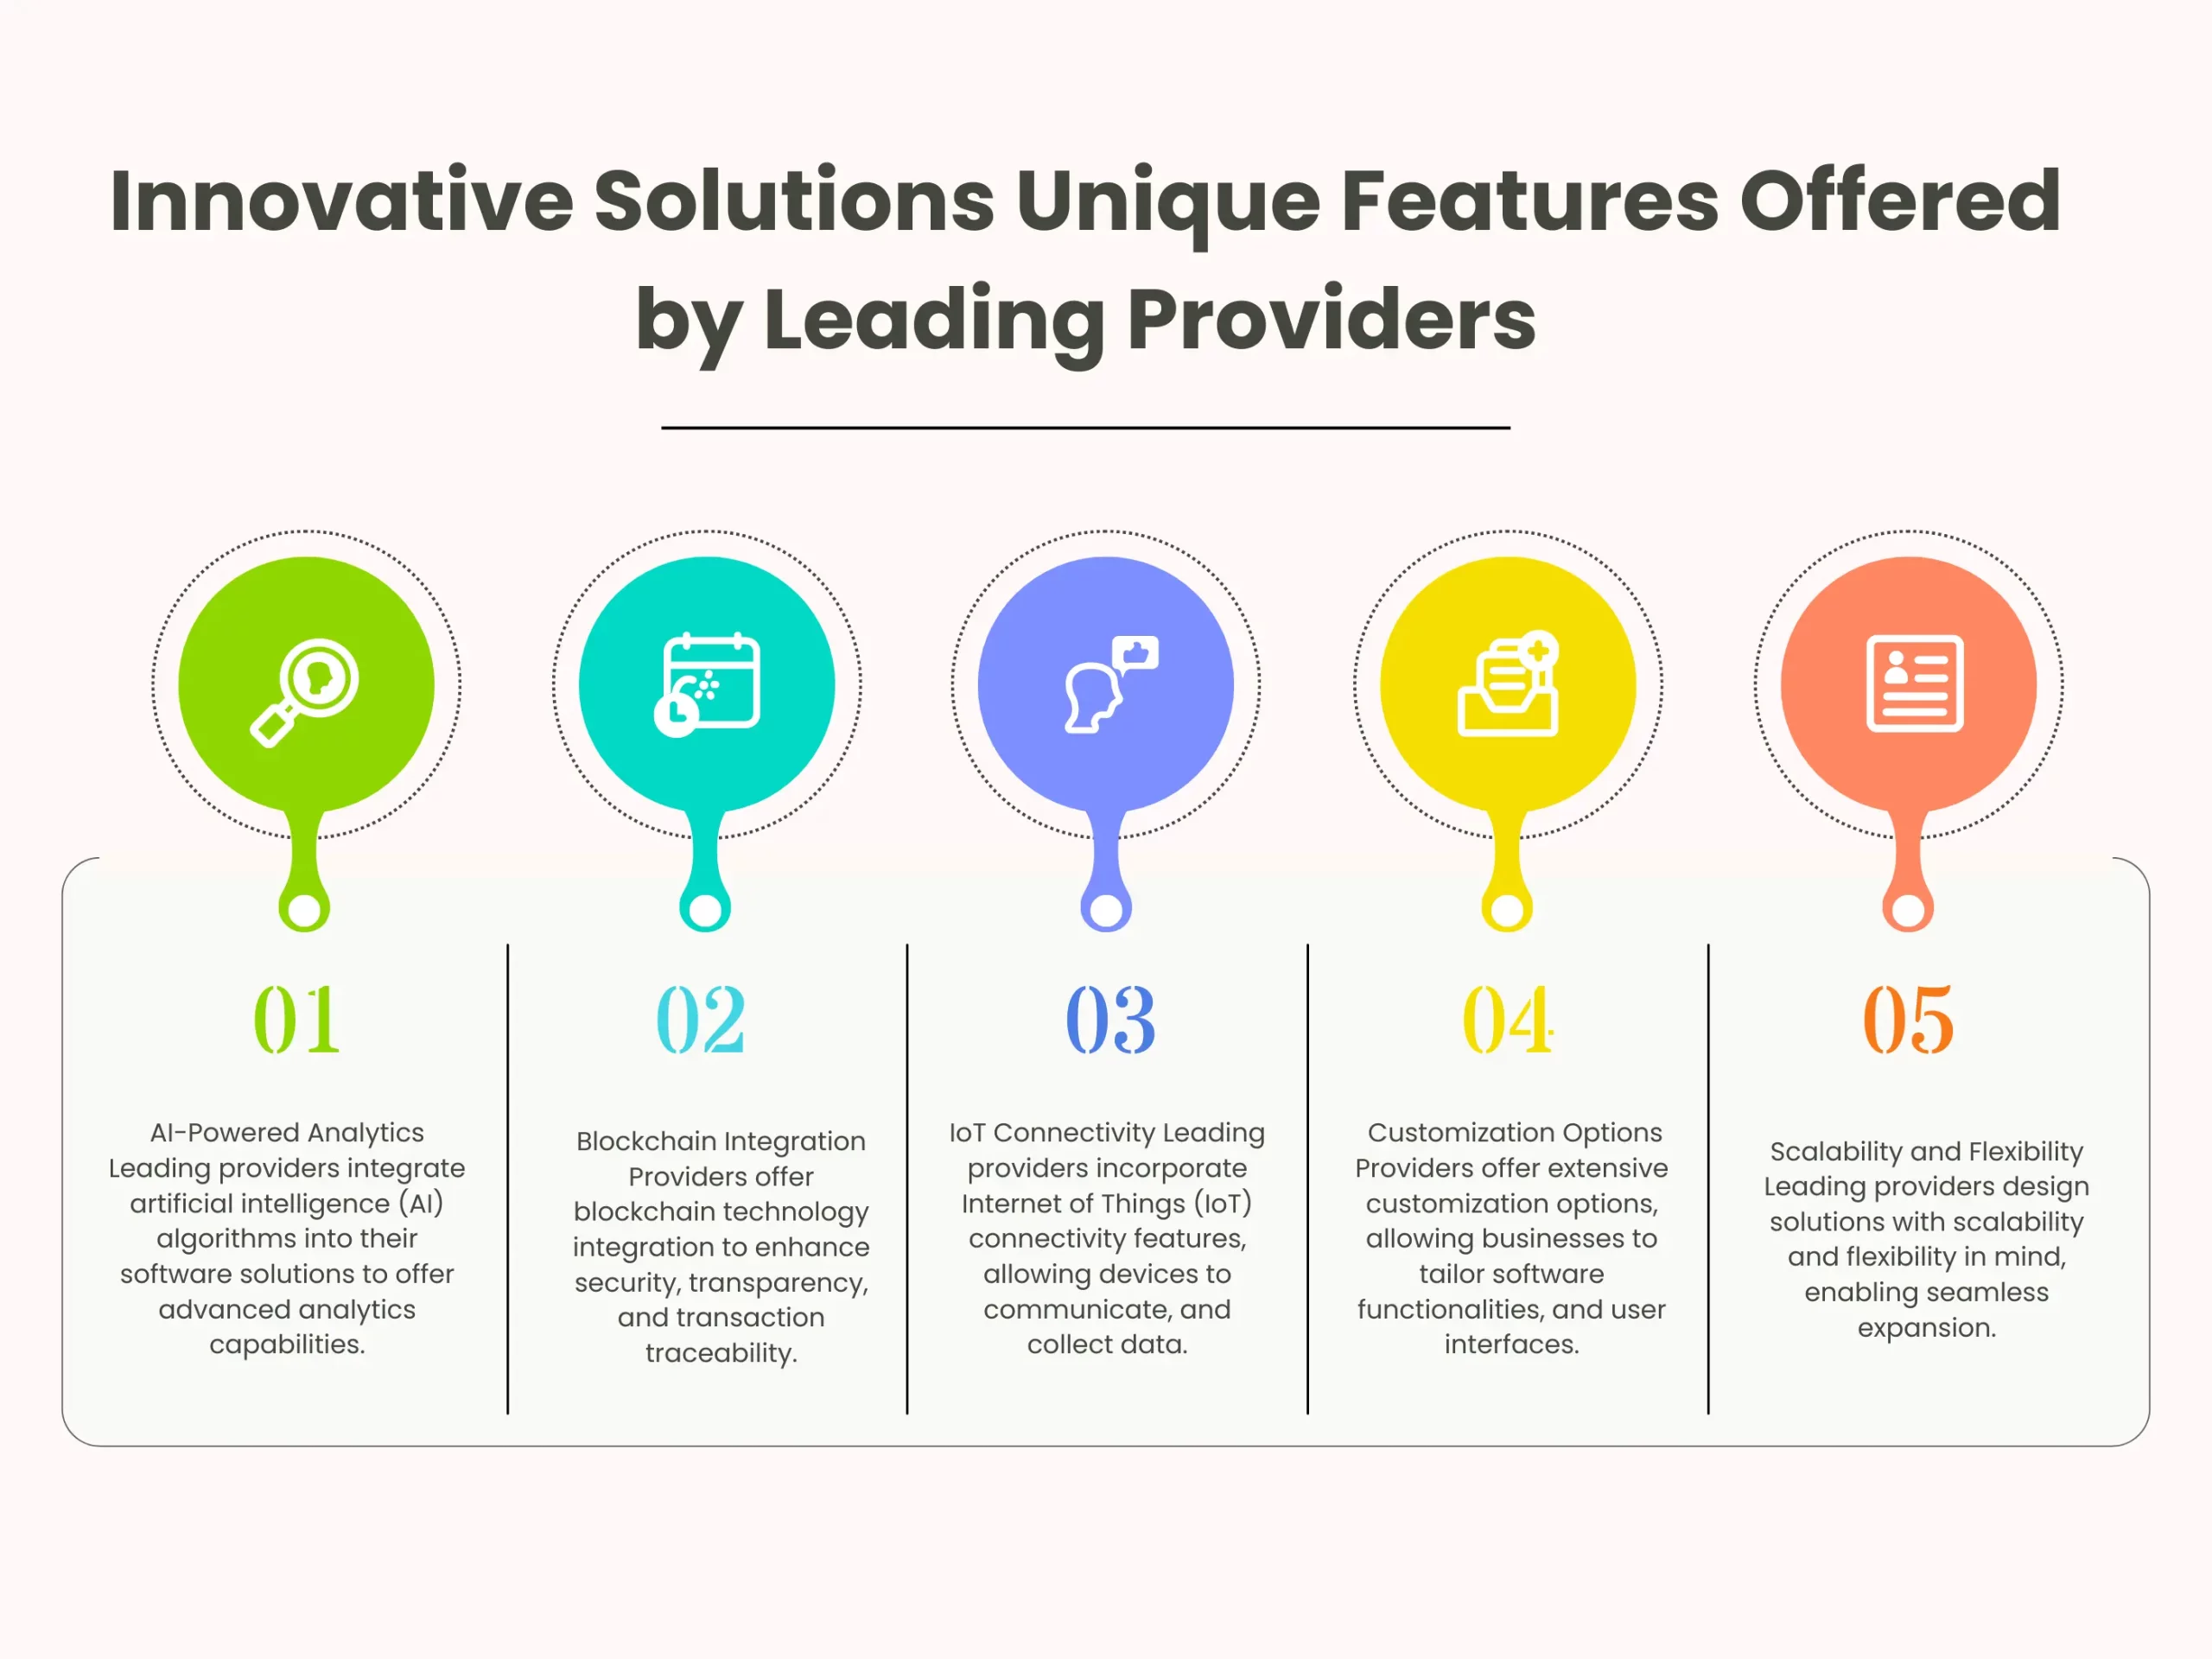 Innovative Solutions Unique Features Offered by Leading Providers